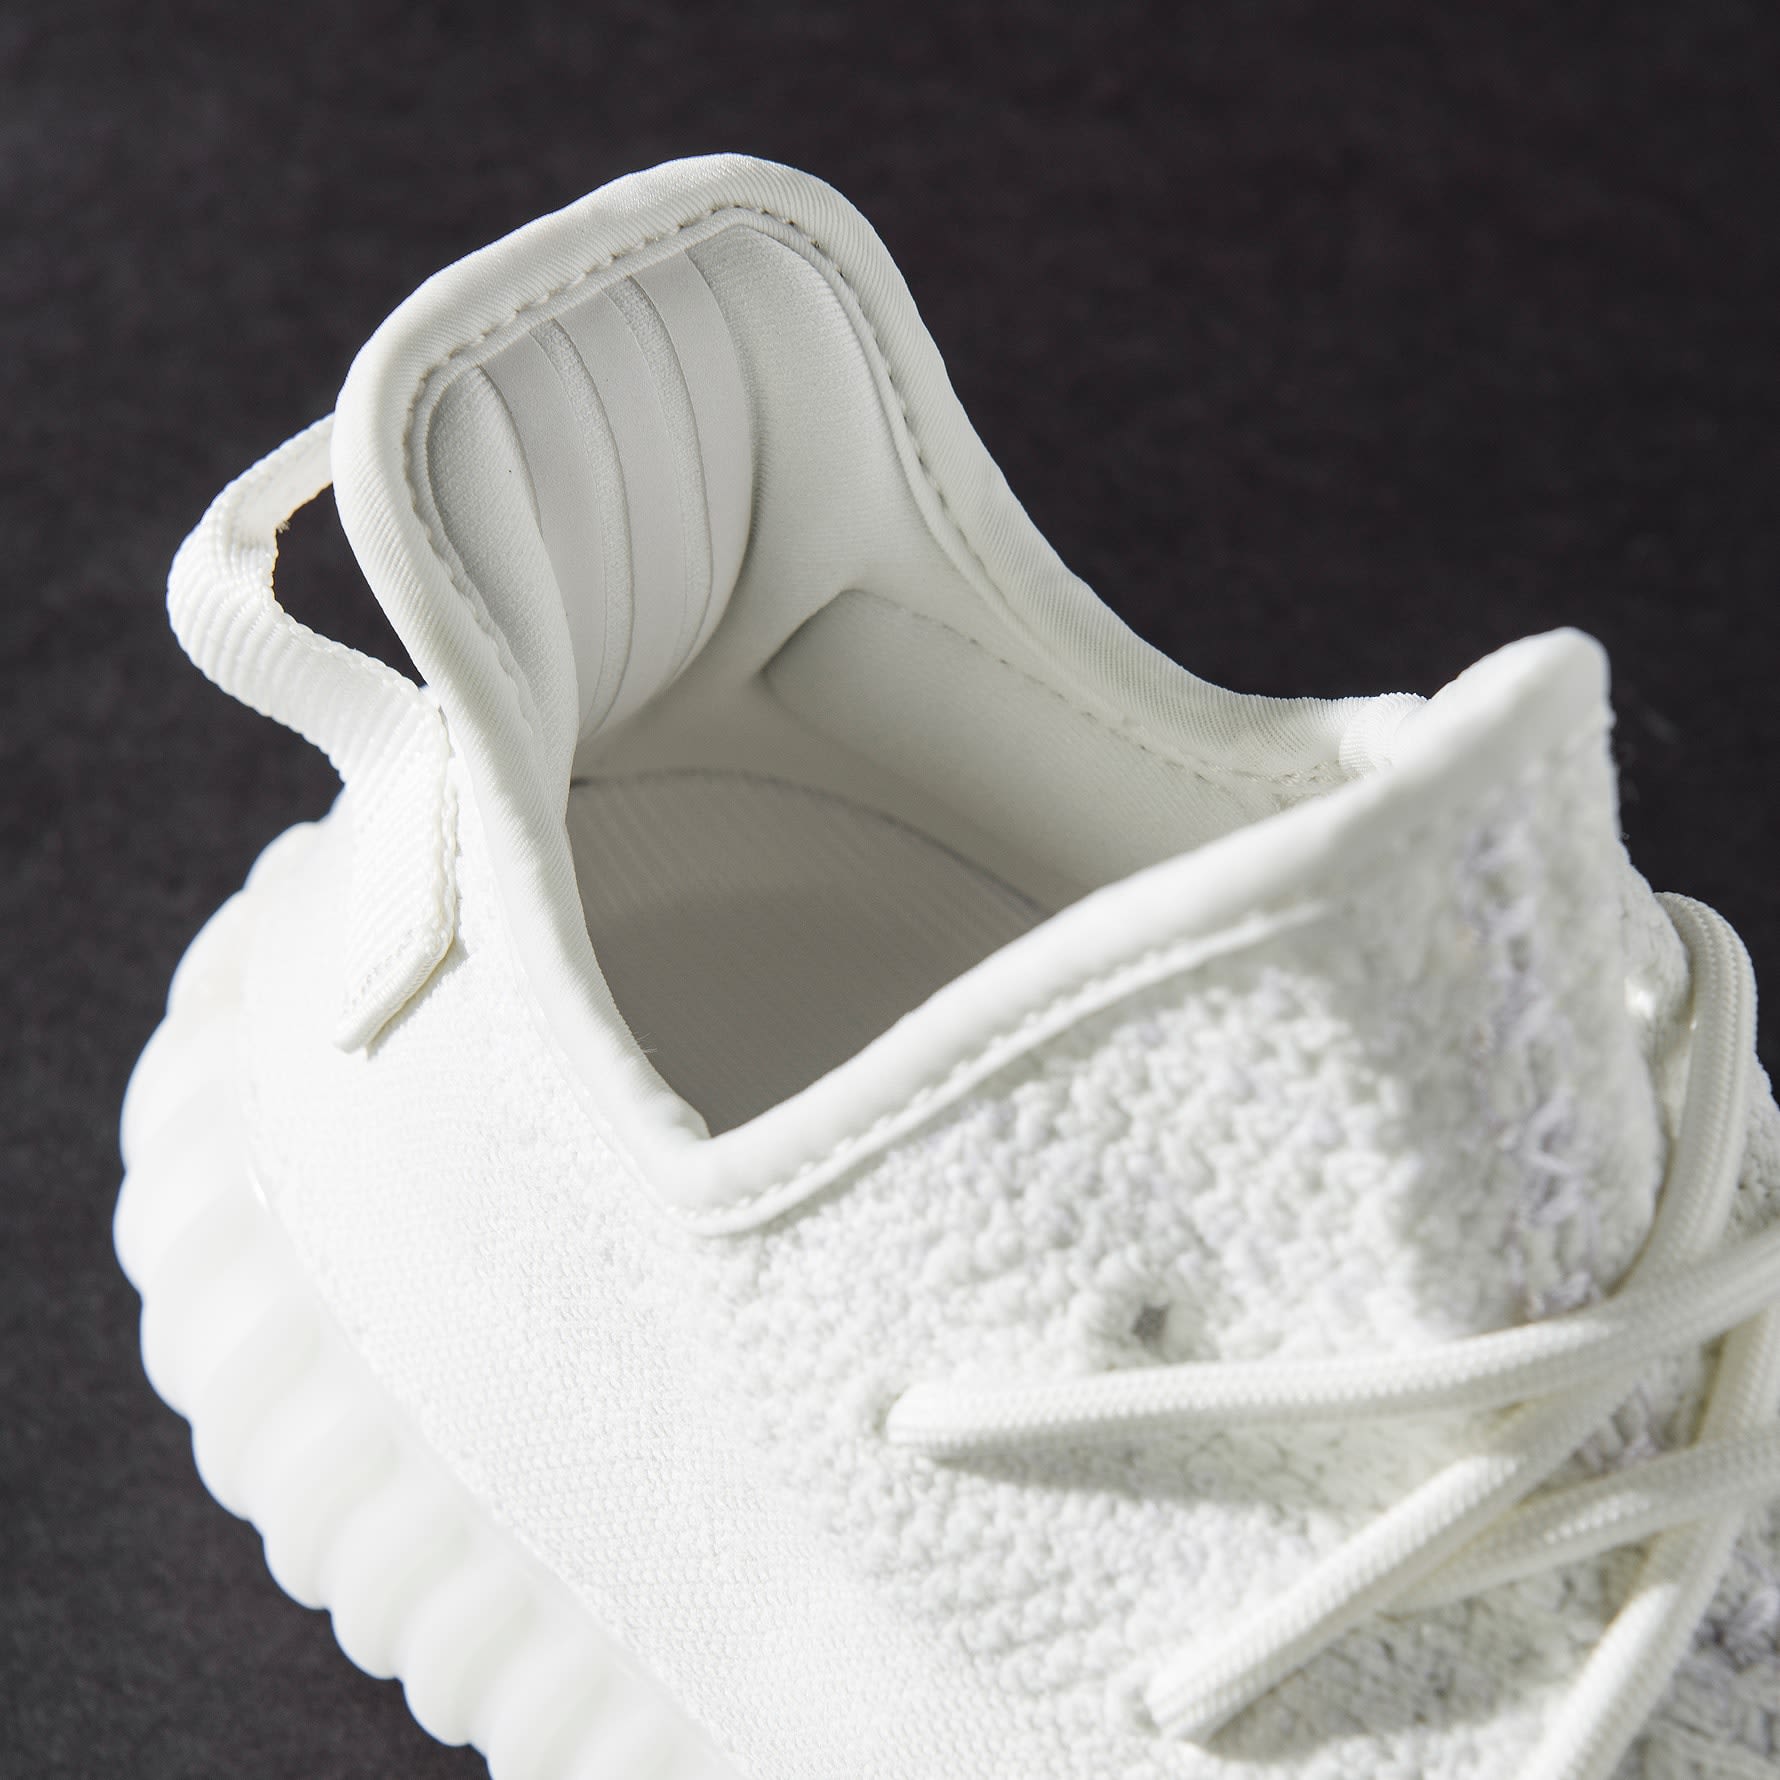 Ooze ankomme at opfinde Adidas Yeezy Boost 350 V2 "Cream White" Release Info | Sole Collector